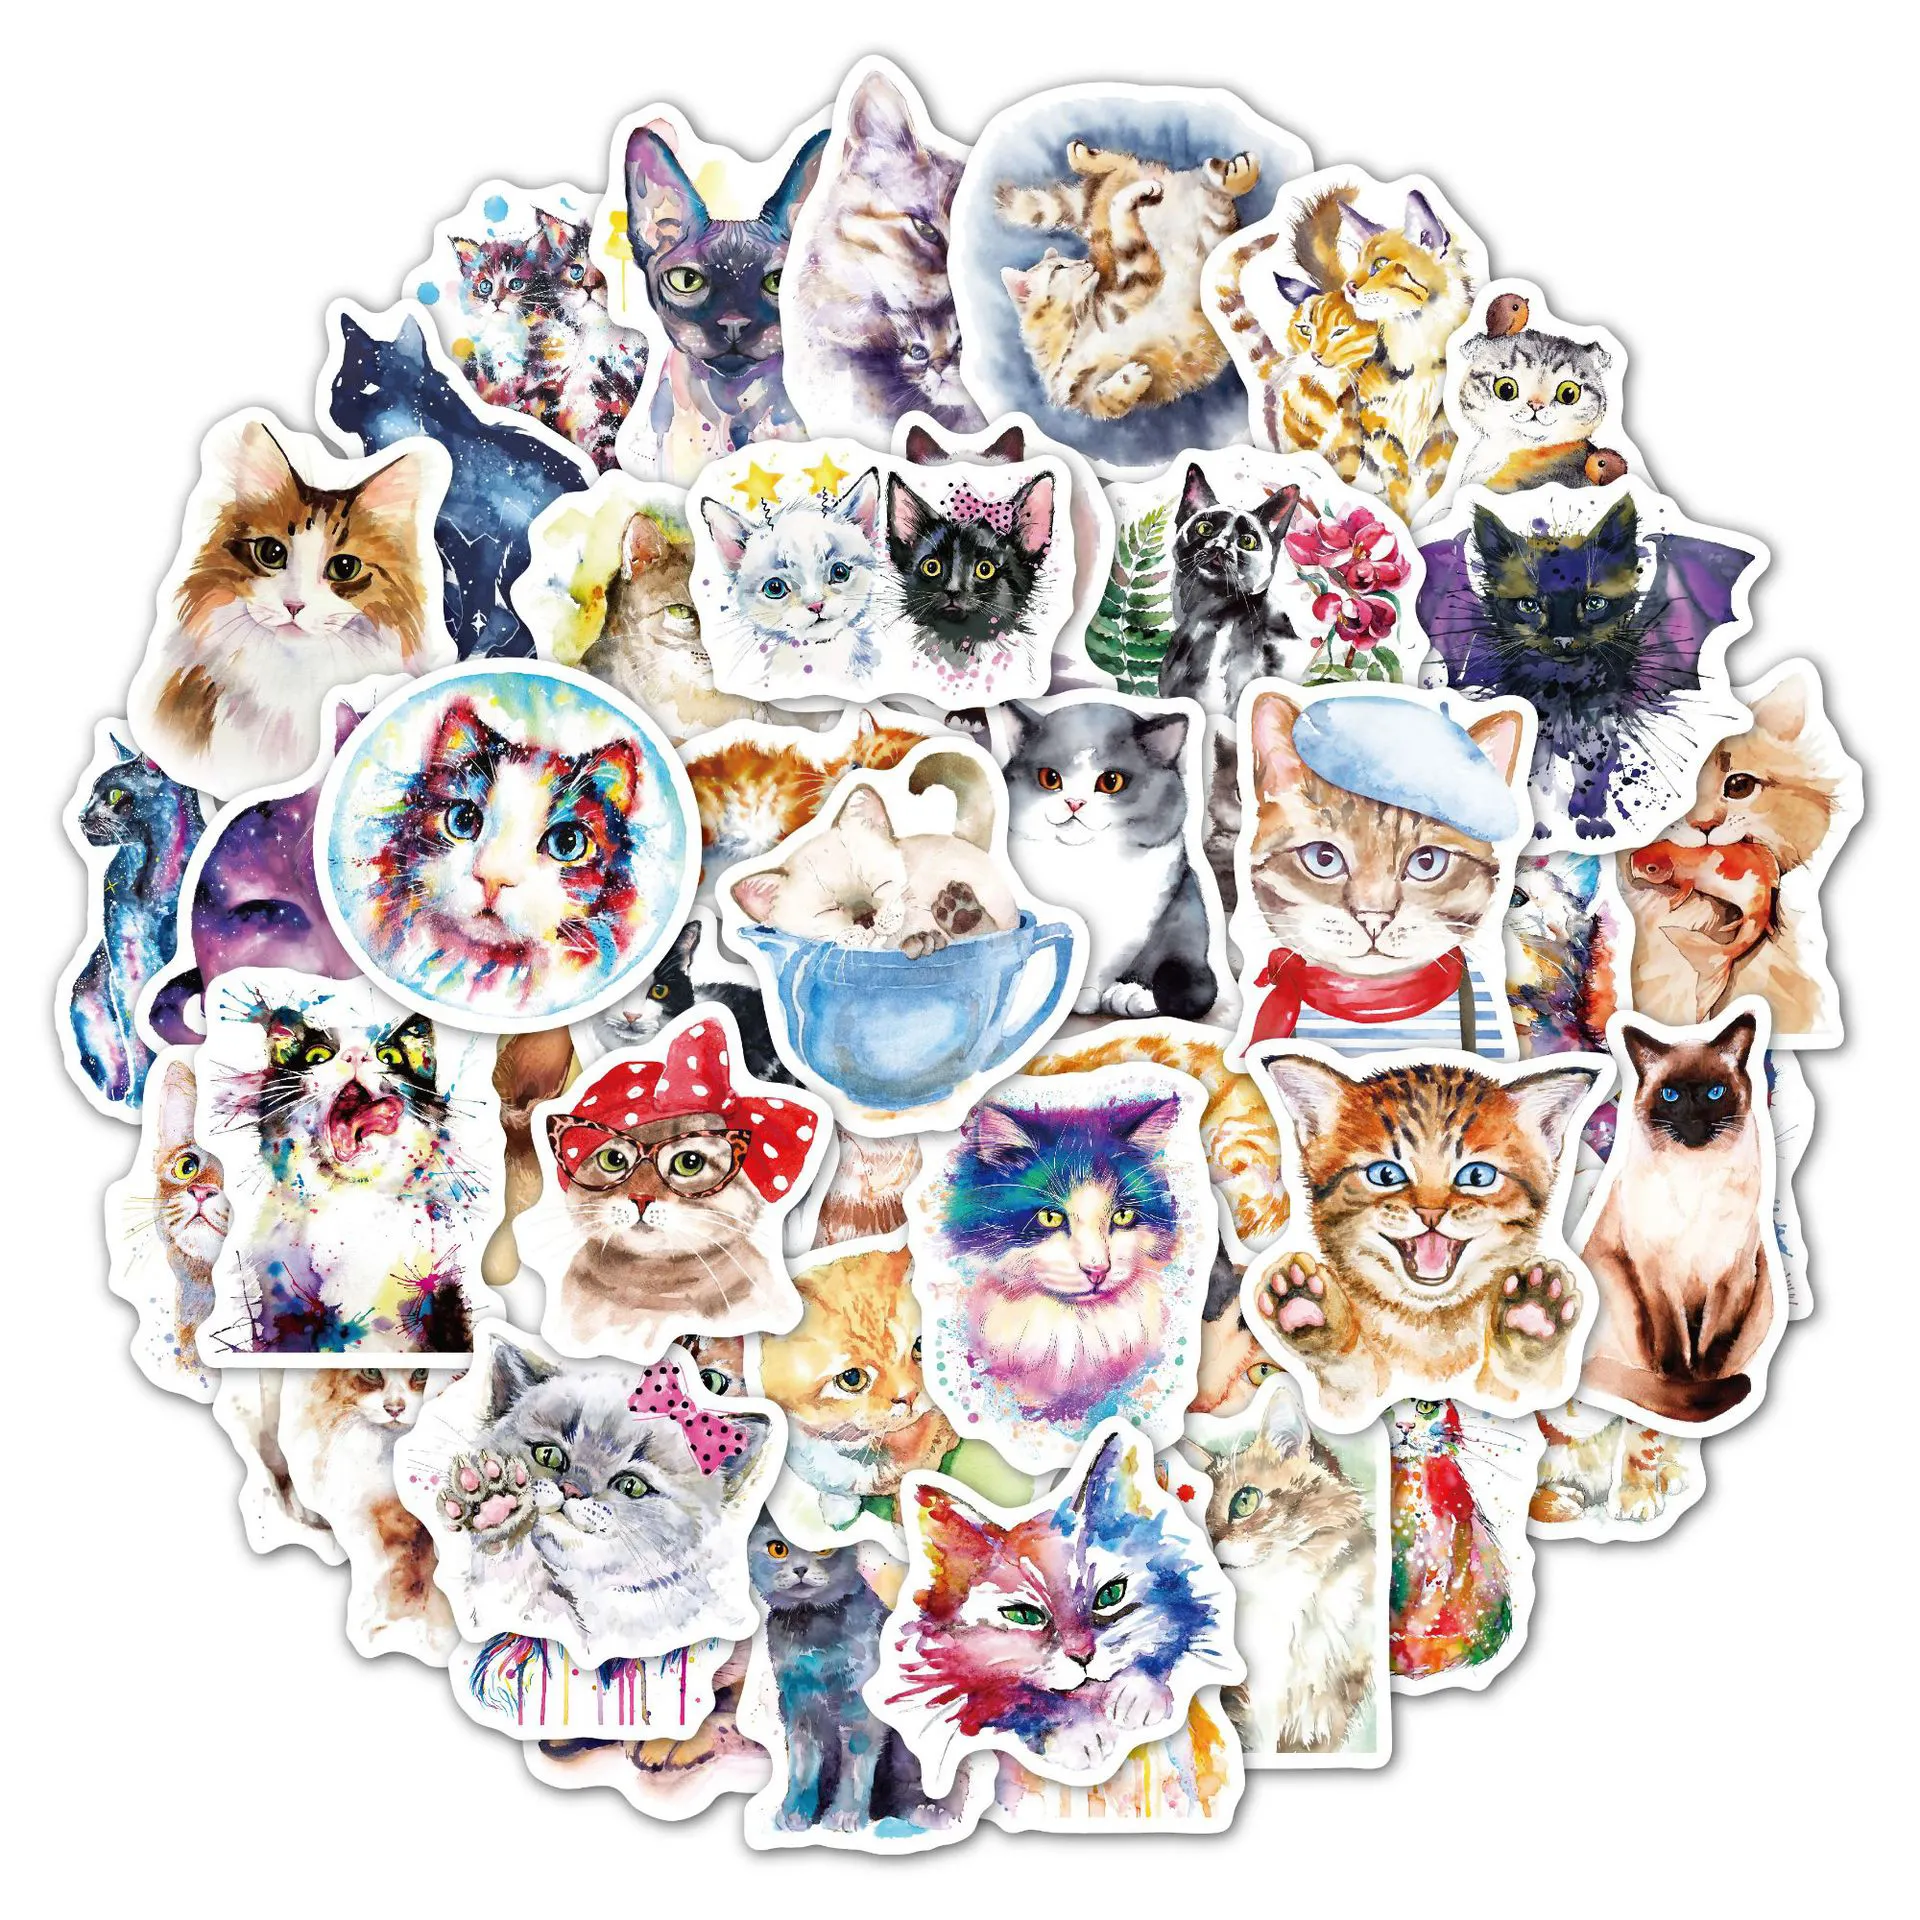 Watercolor 50 PCS Cute Cartoon Stickers Lovely Animal Cat Owl Deer Adhesive Stickers